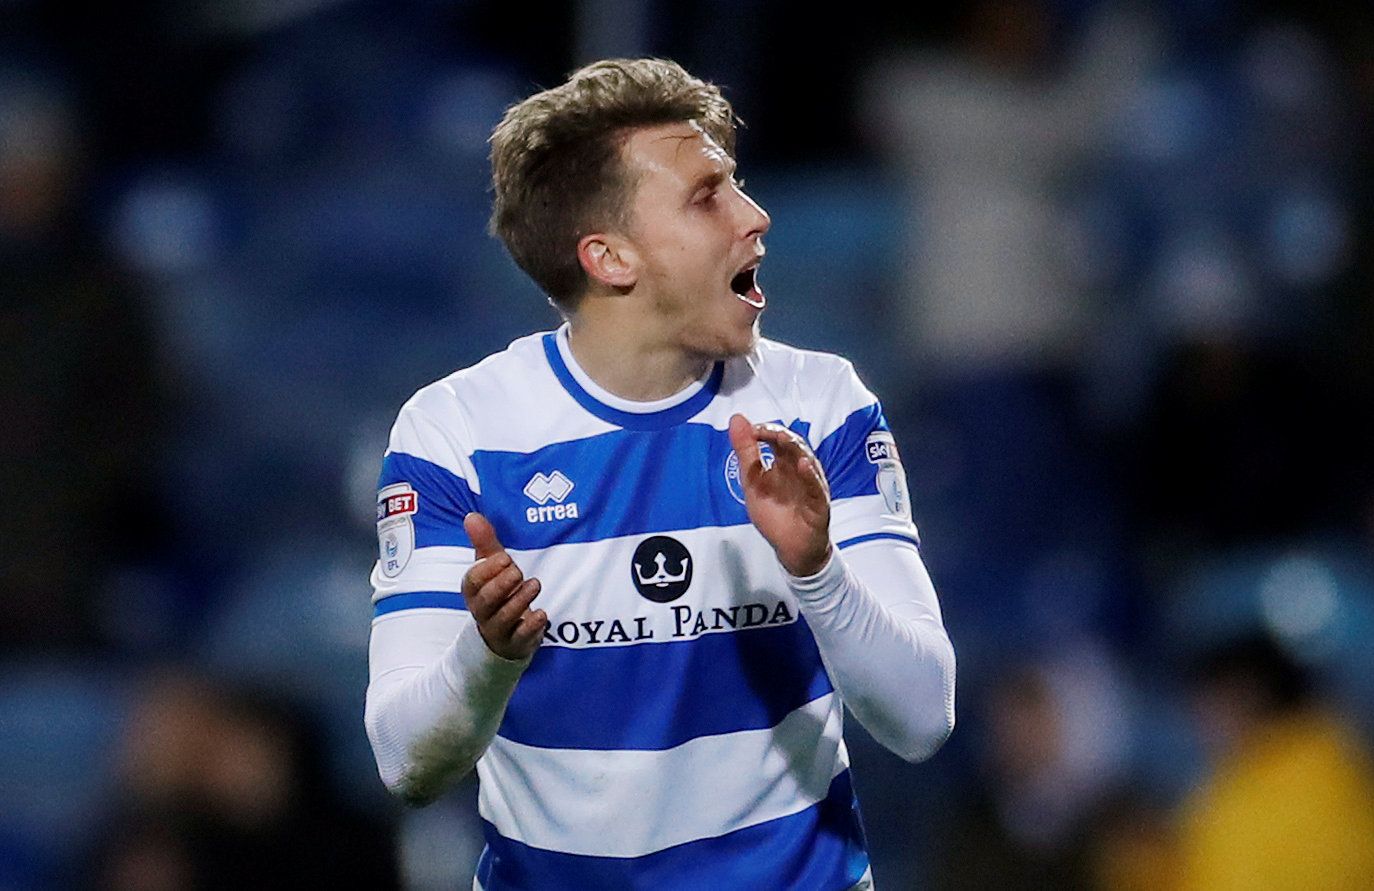 Soccer Football - Championship - Queens Park Rangers vs Brentford - Loftus Road, London, Britain - November 27, 2017   Queens Park Rangers' Luke Freeman celebrates after the match     Action Images/Andrew Couldridge    EDITORIAL USE ONLY. No use with unauthorized audio, video, data, fixture lists, club/league logos or 